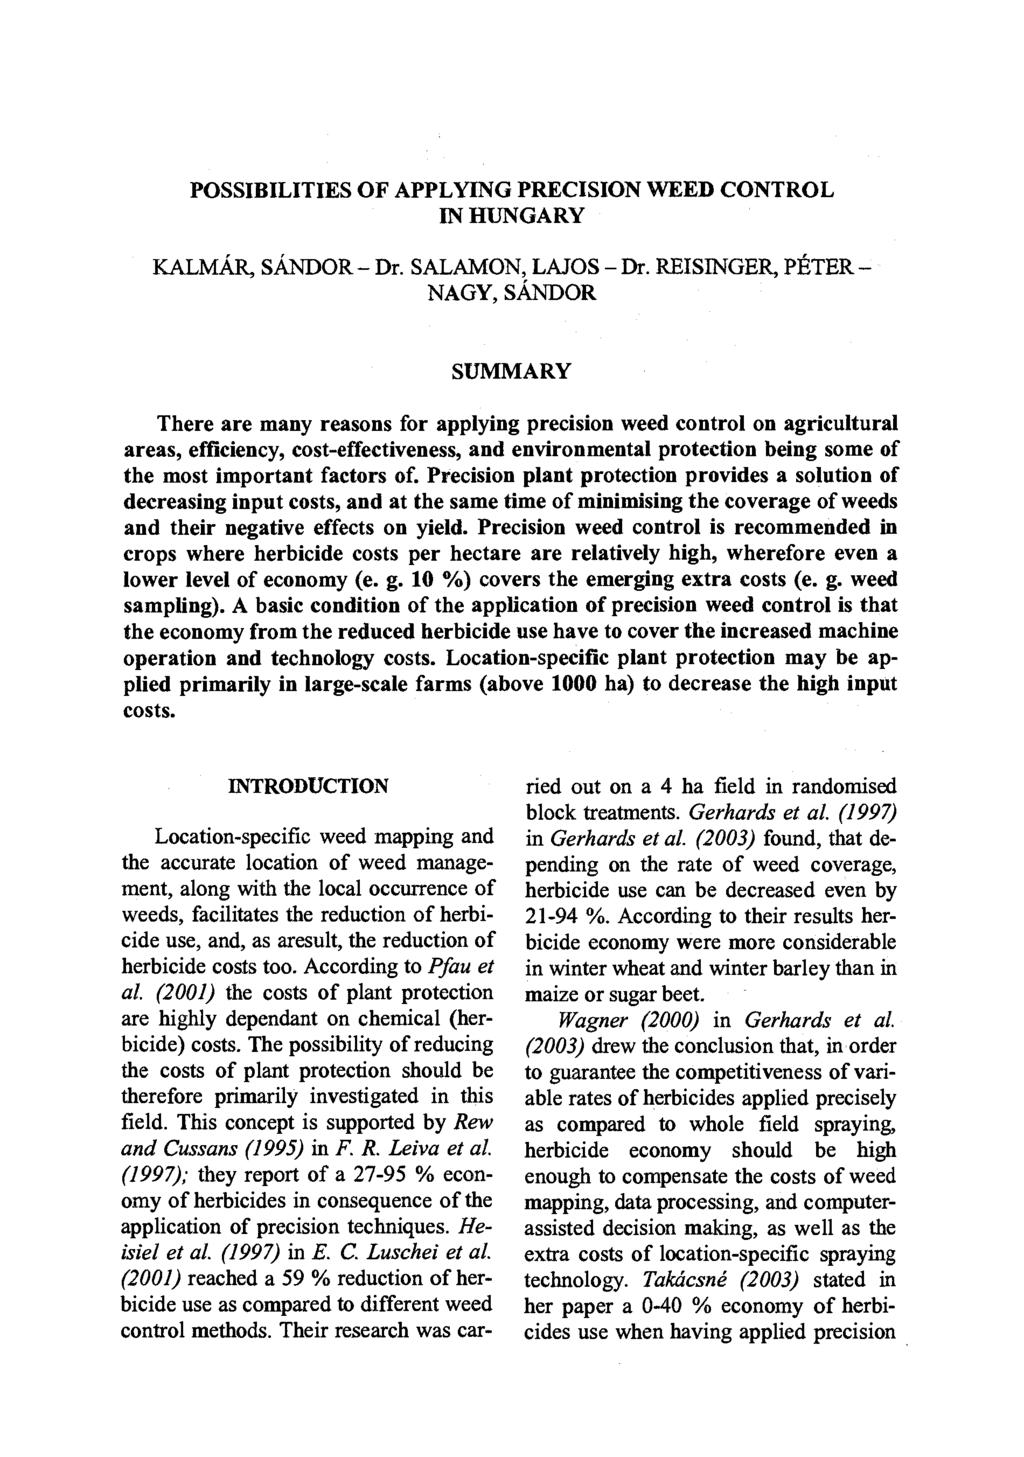 POSSIBILITIES OF APPLYING PRECISION WEED CONTROL IN HUNGARY KALMÁR, SÁNDOR - Dr. SALAMON, LAJOS - Dr.